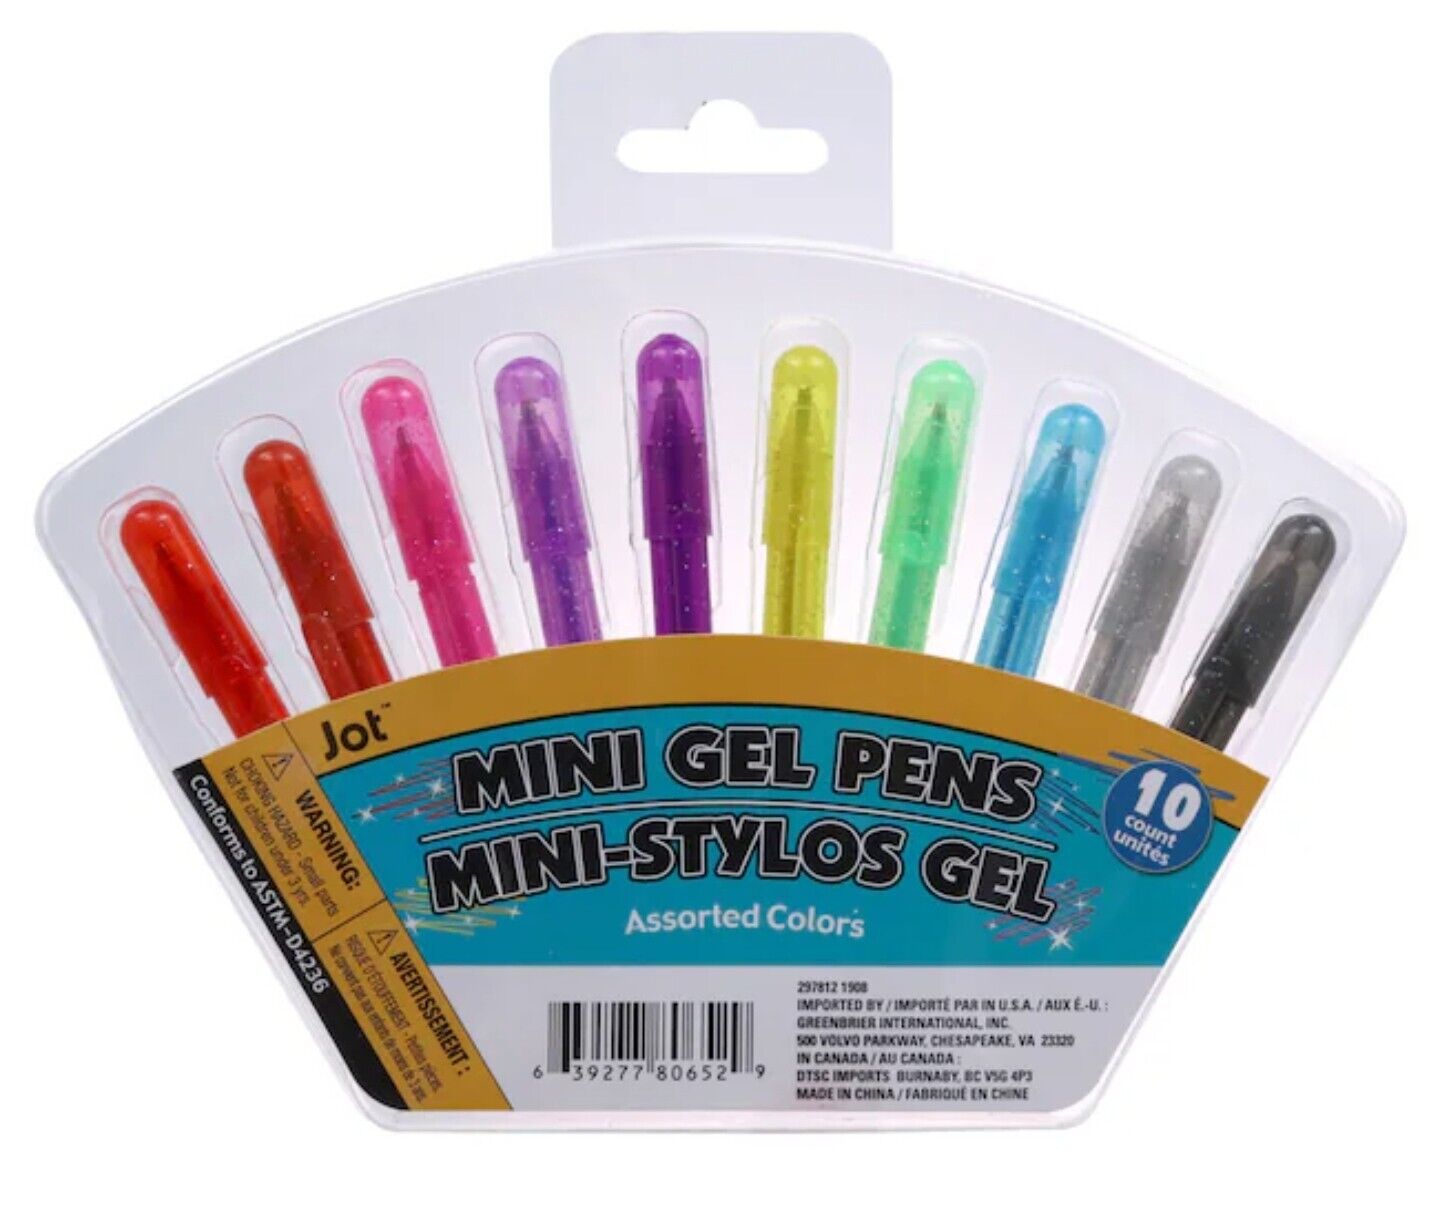 Colorful Mini Gel Pens/Smooth Flow & Great for Writing or Drawing/10-PC.